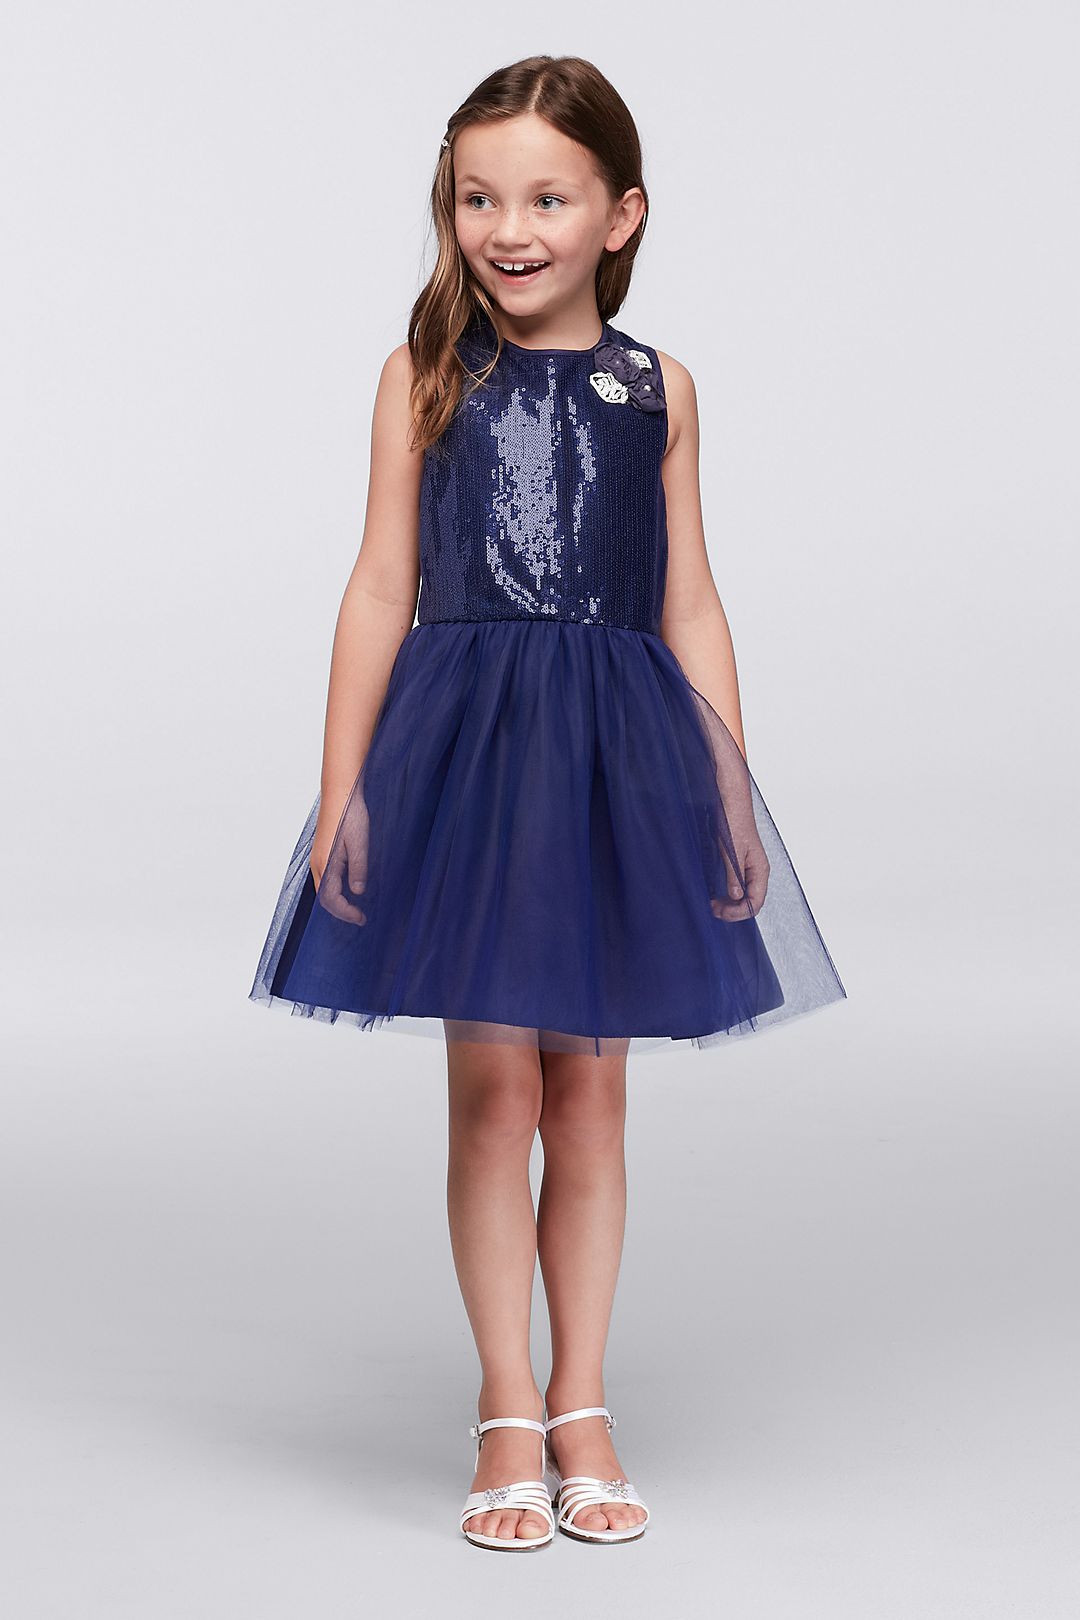 Sequin and Tulle Party Dress with Flower Applique Image 1